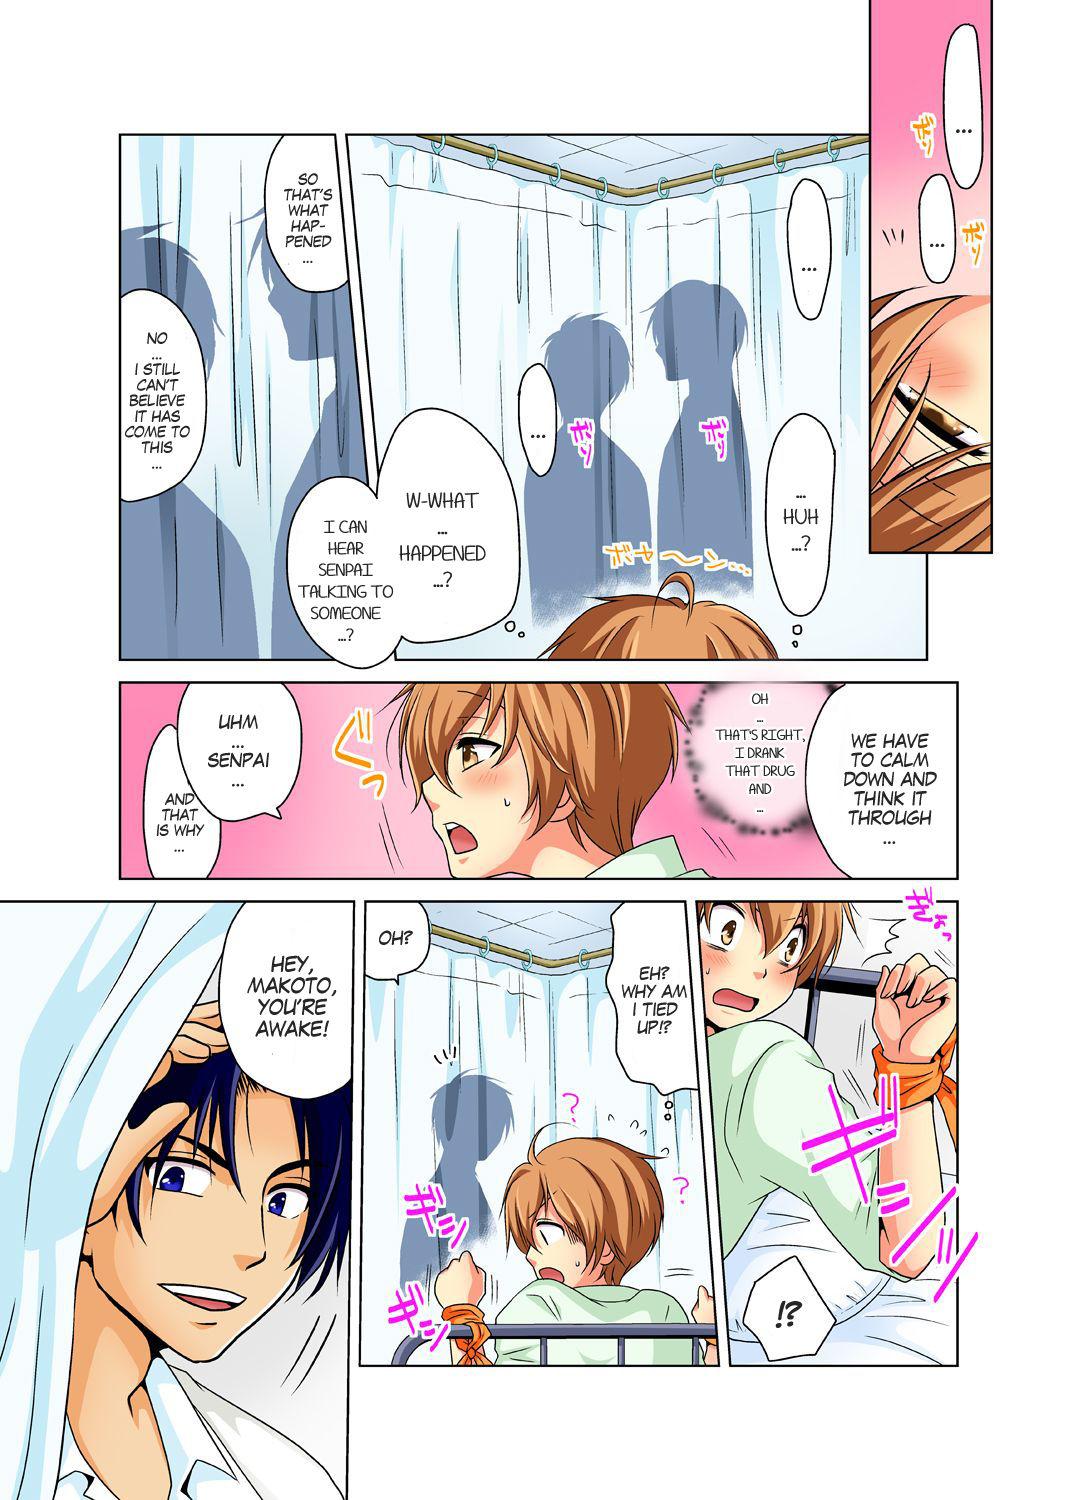 Officesex Nyotaika de Ecchi Kenshin!? Mirudake tte Itta no ni... 1 | Gender Bender Into Sexy Medical Examination! You said that you were only going to look... 1 Jock - Page 5